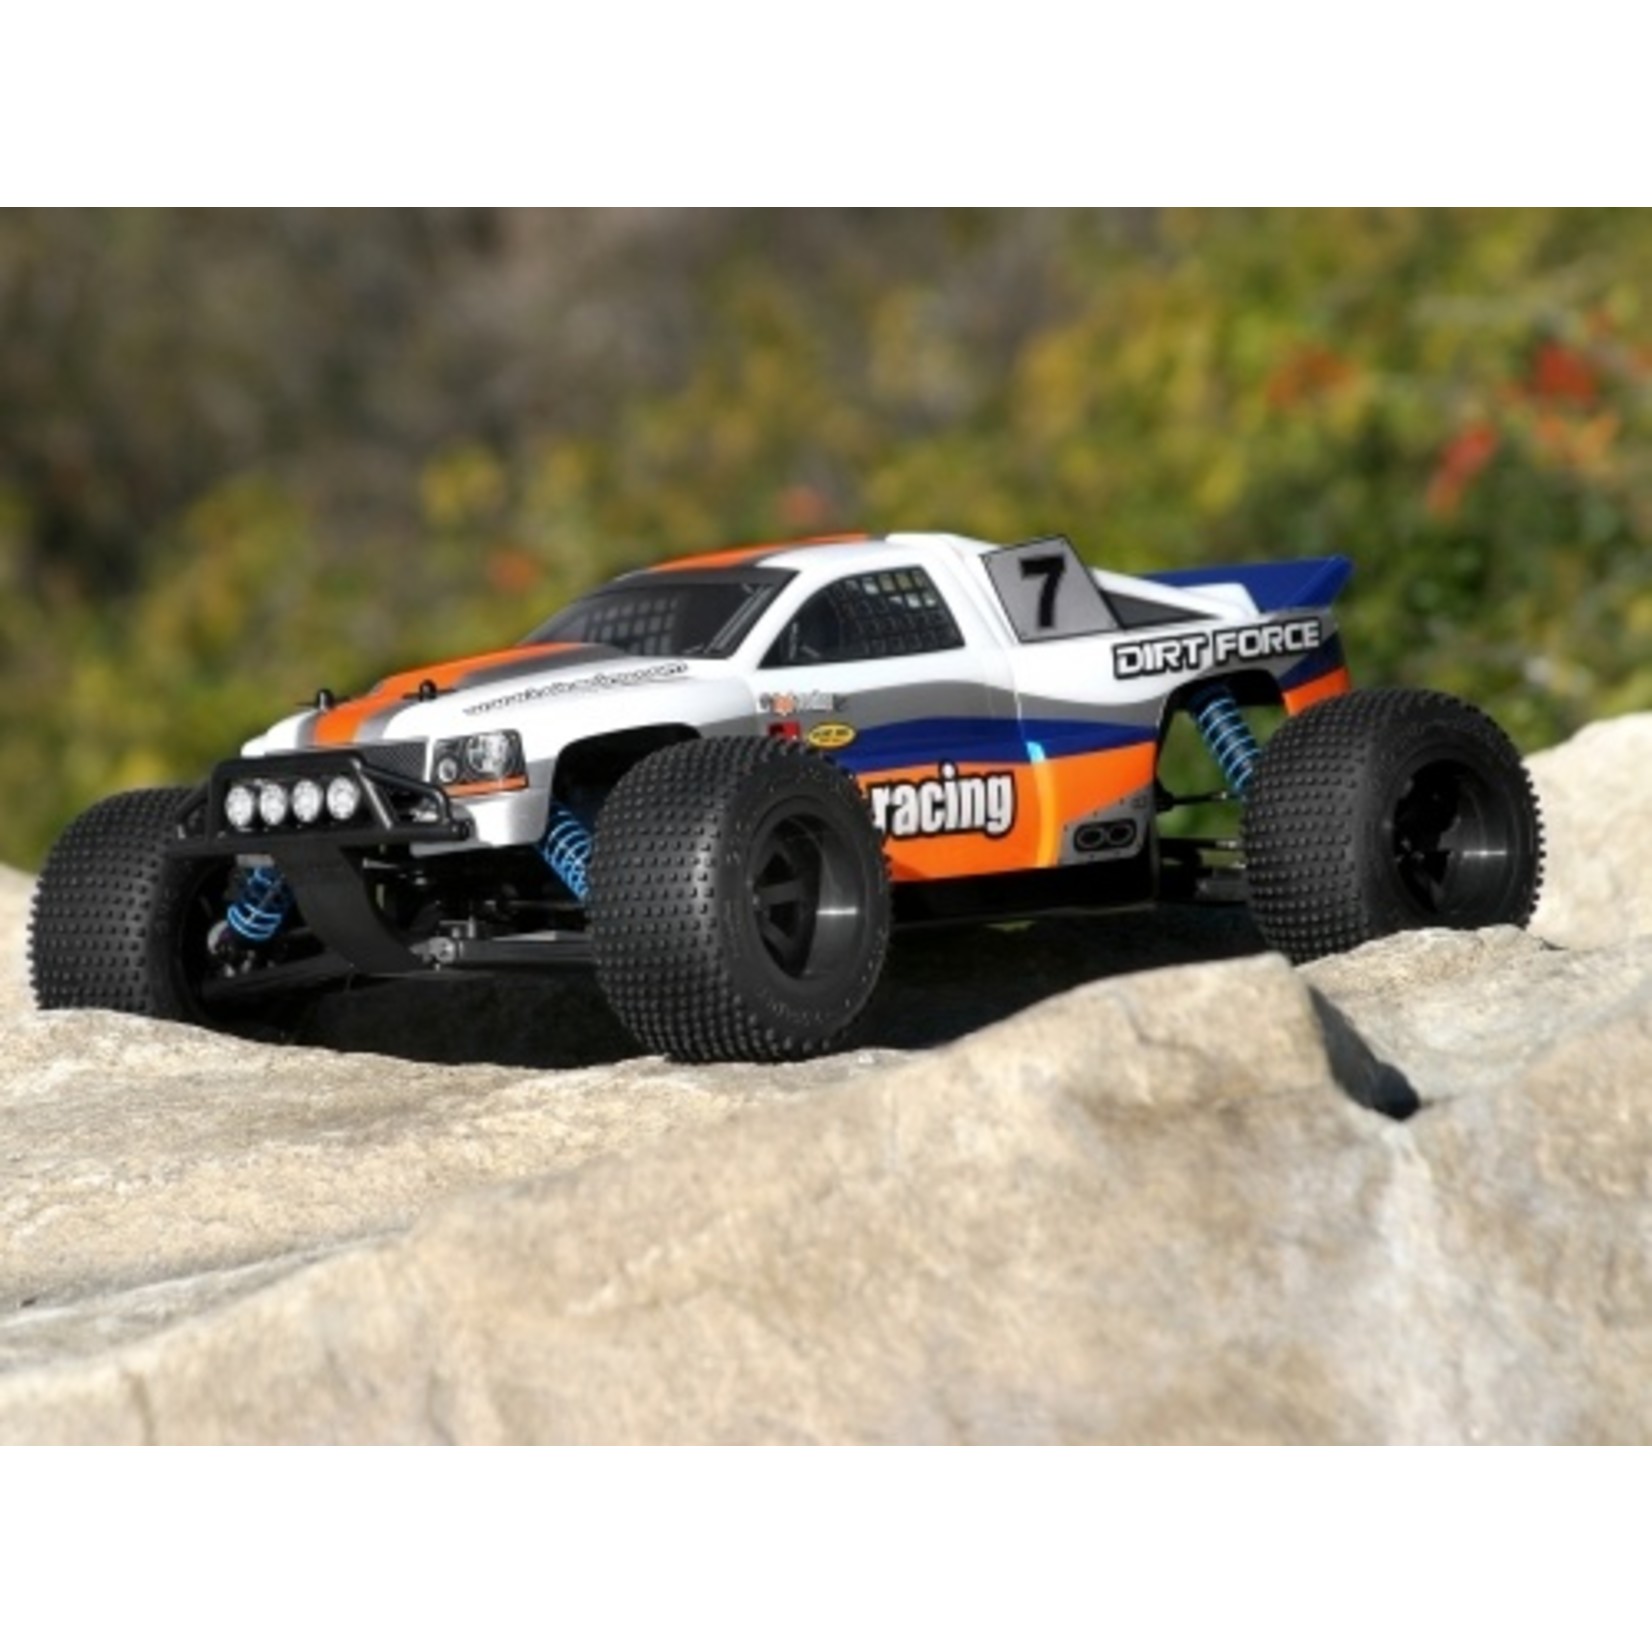 HPI Racing Dirt Force Clear Body